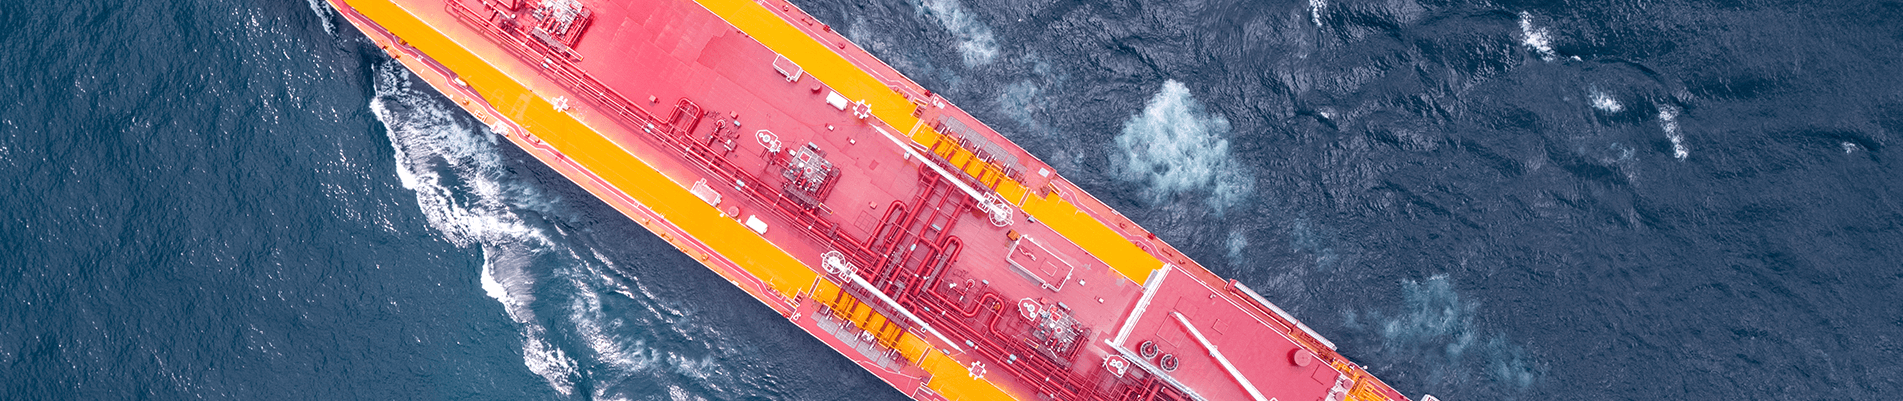 birds eye view of LNG vessel at sea